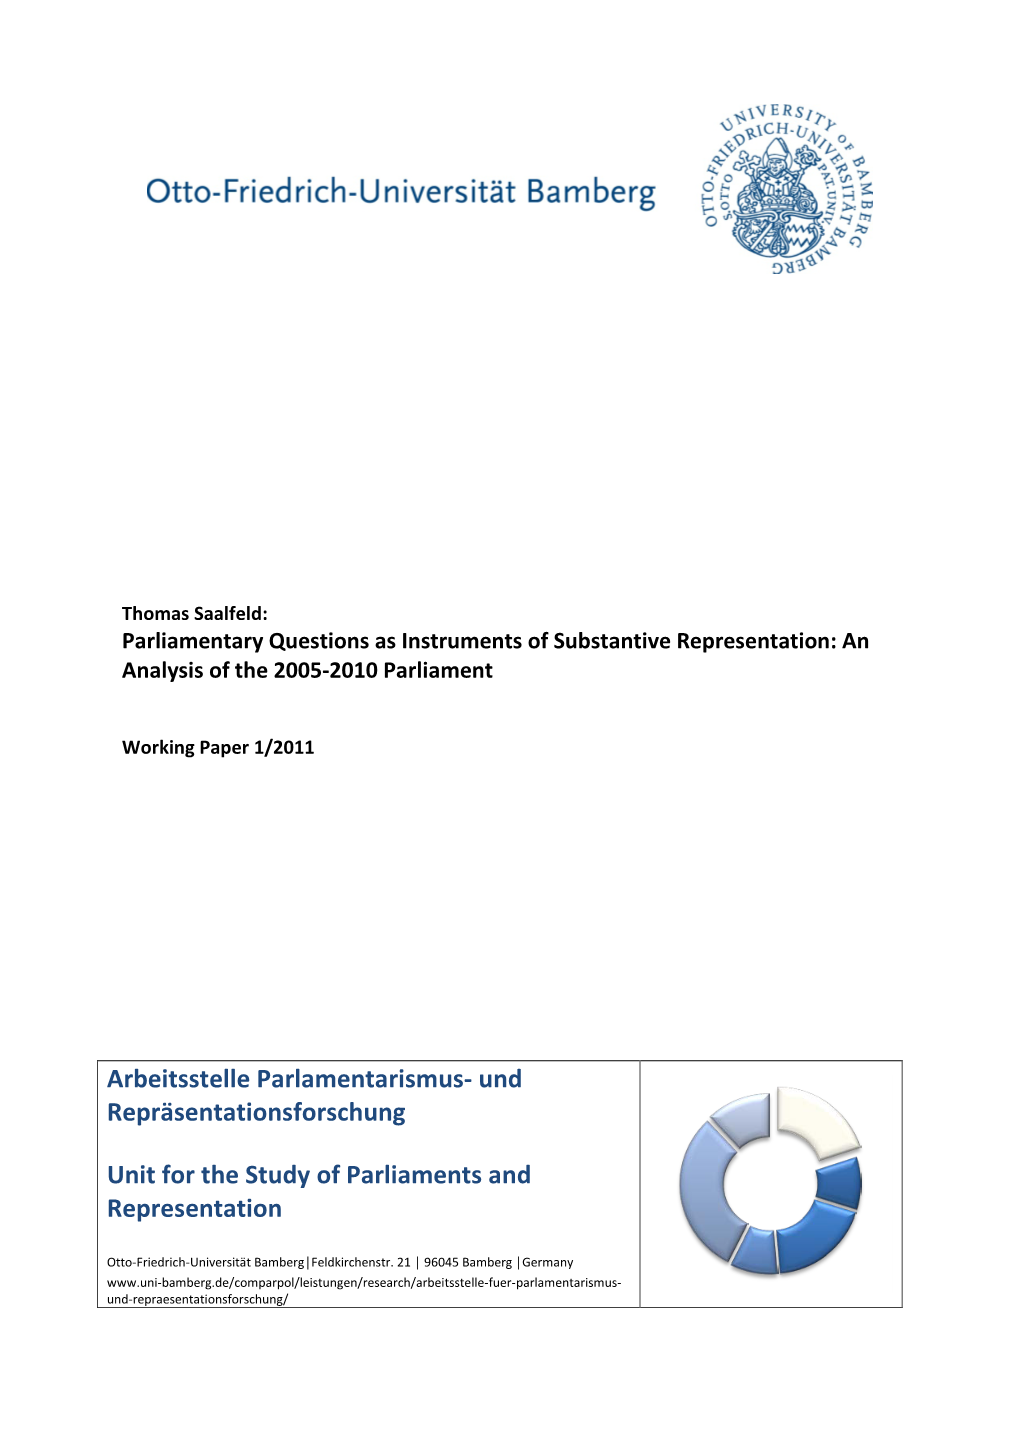 Und Repräsentationsforschung Unit for the Study of Parliaments and Representation